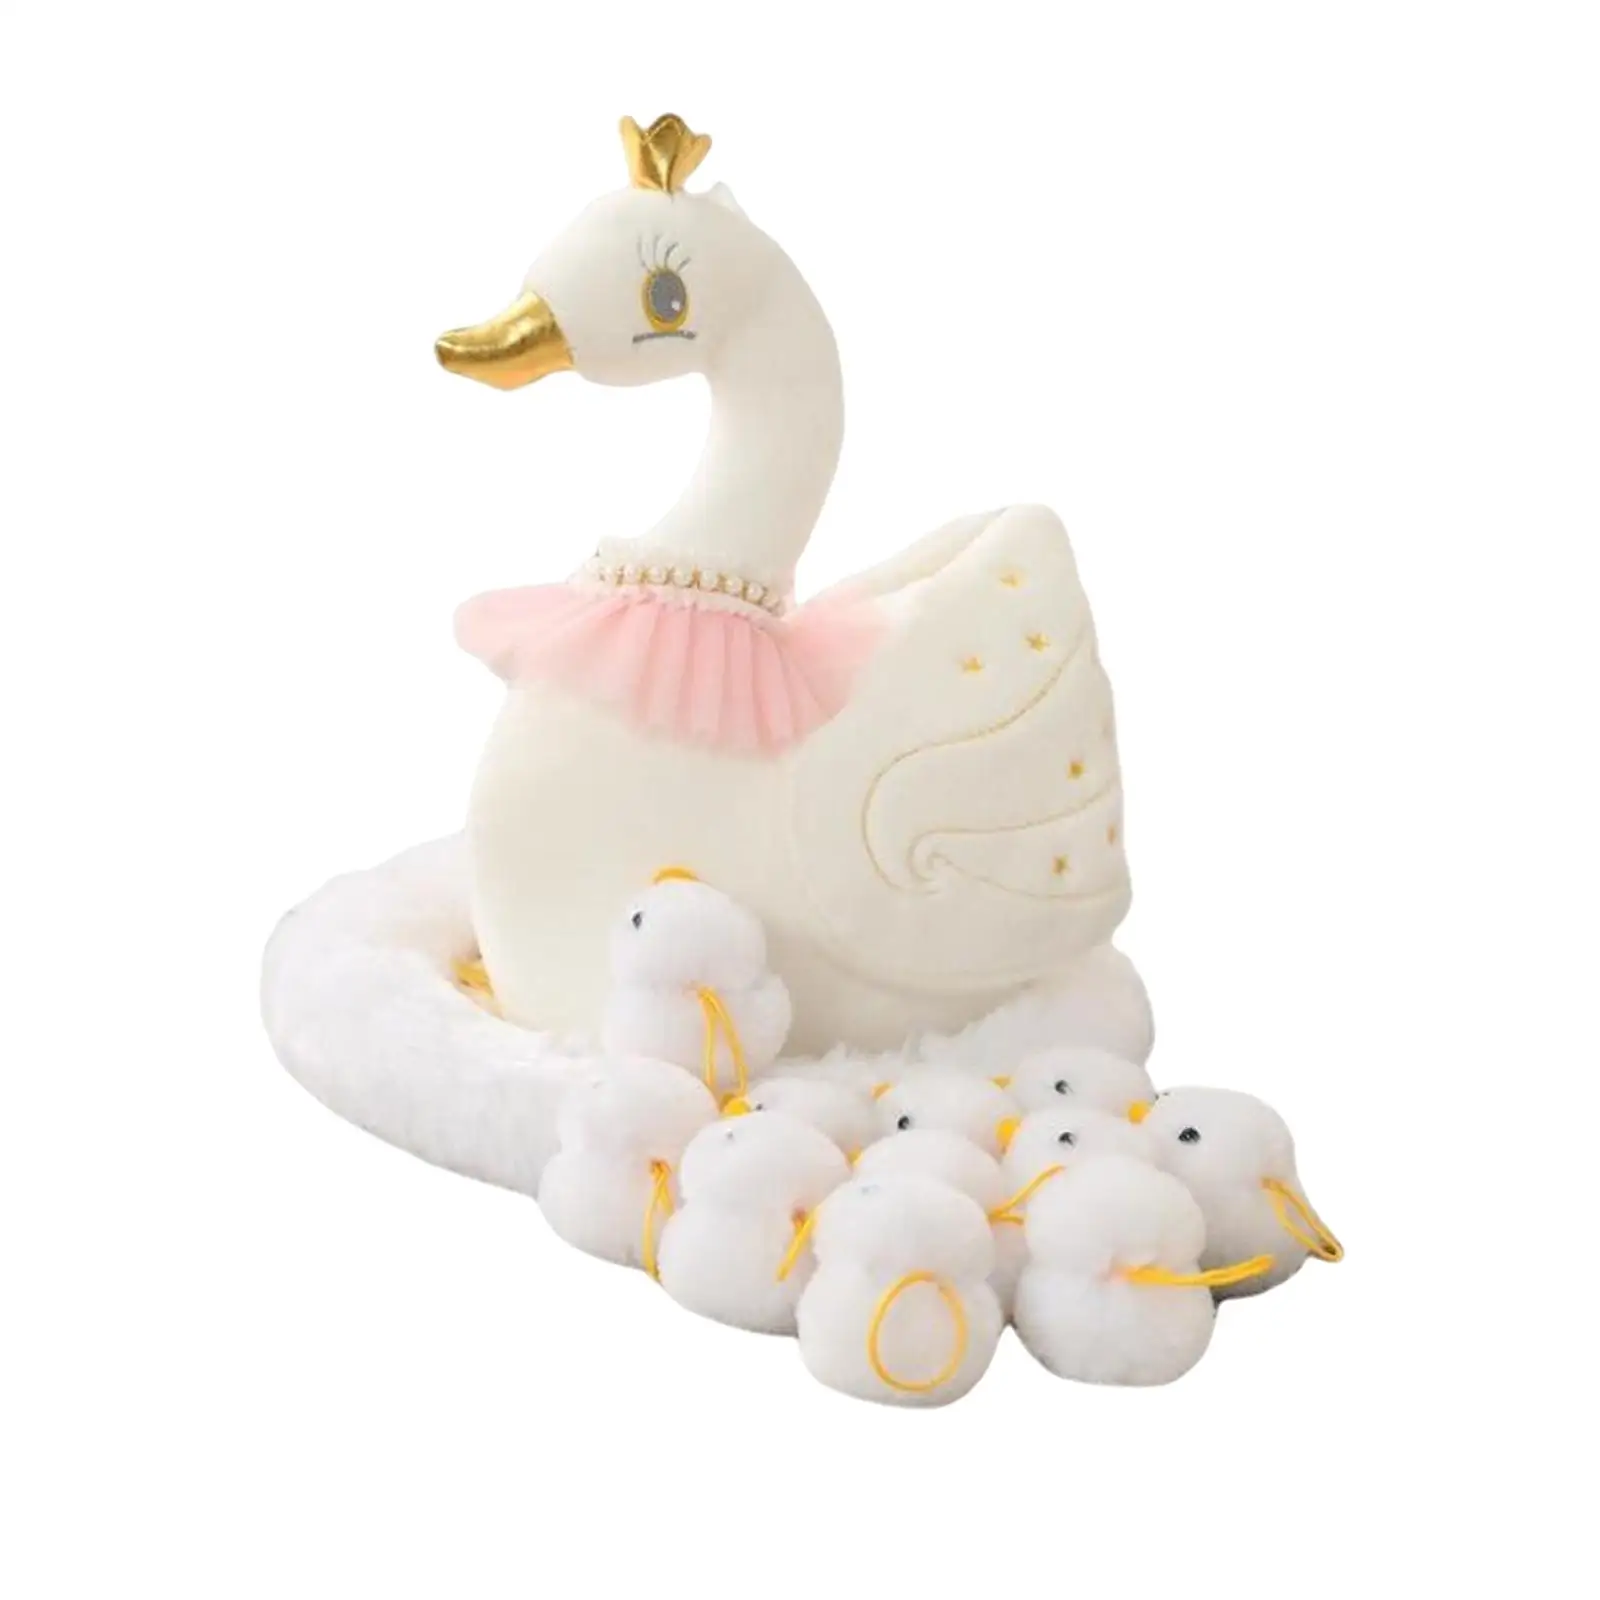 Animal Plush Toy Swan Sculpture Nest Stuffed Lovely for Easter Lawn Patio Decoration